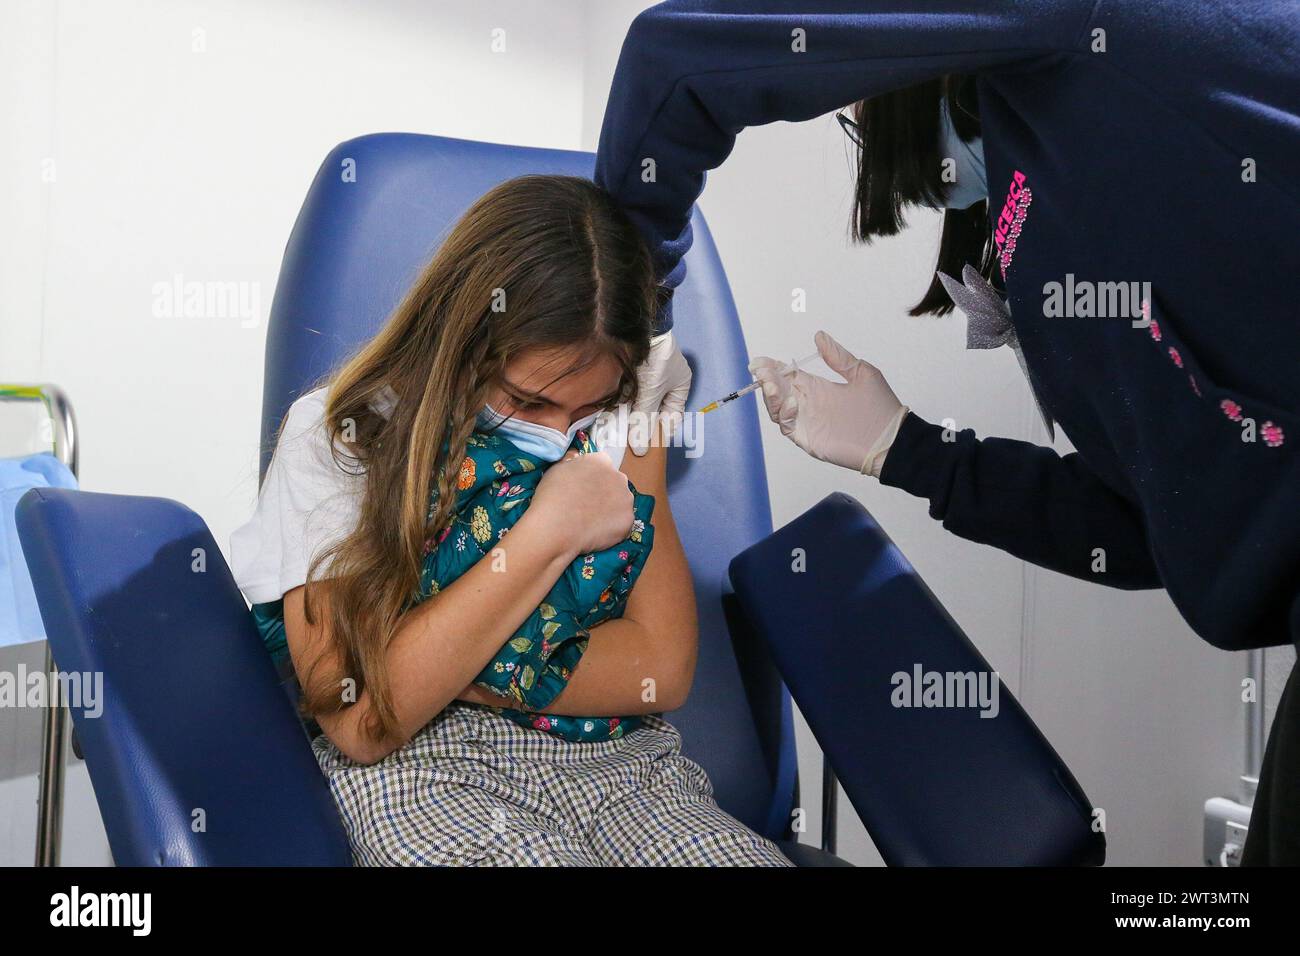 A little girl getting vaccinated, on the first day of vaccination in Italy for children aged 5 to 11, inside a room of the vaccination center set up t Stock Photo